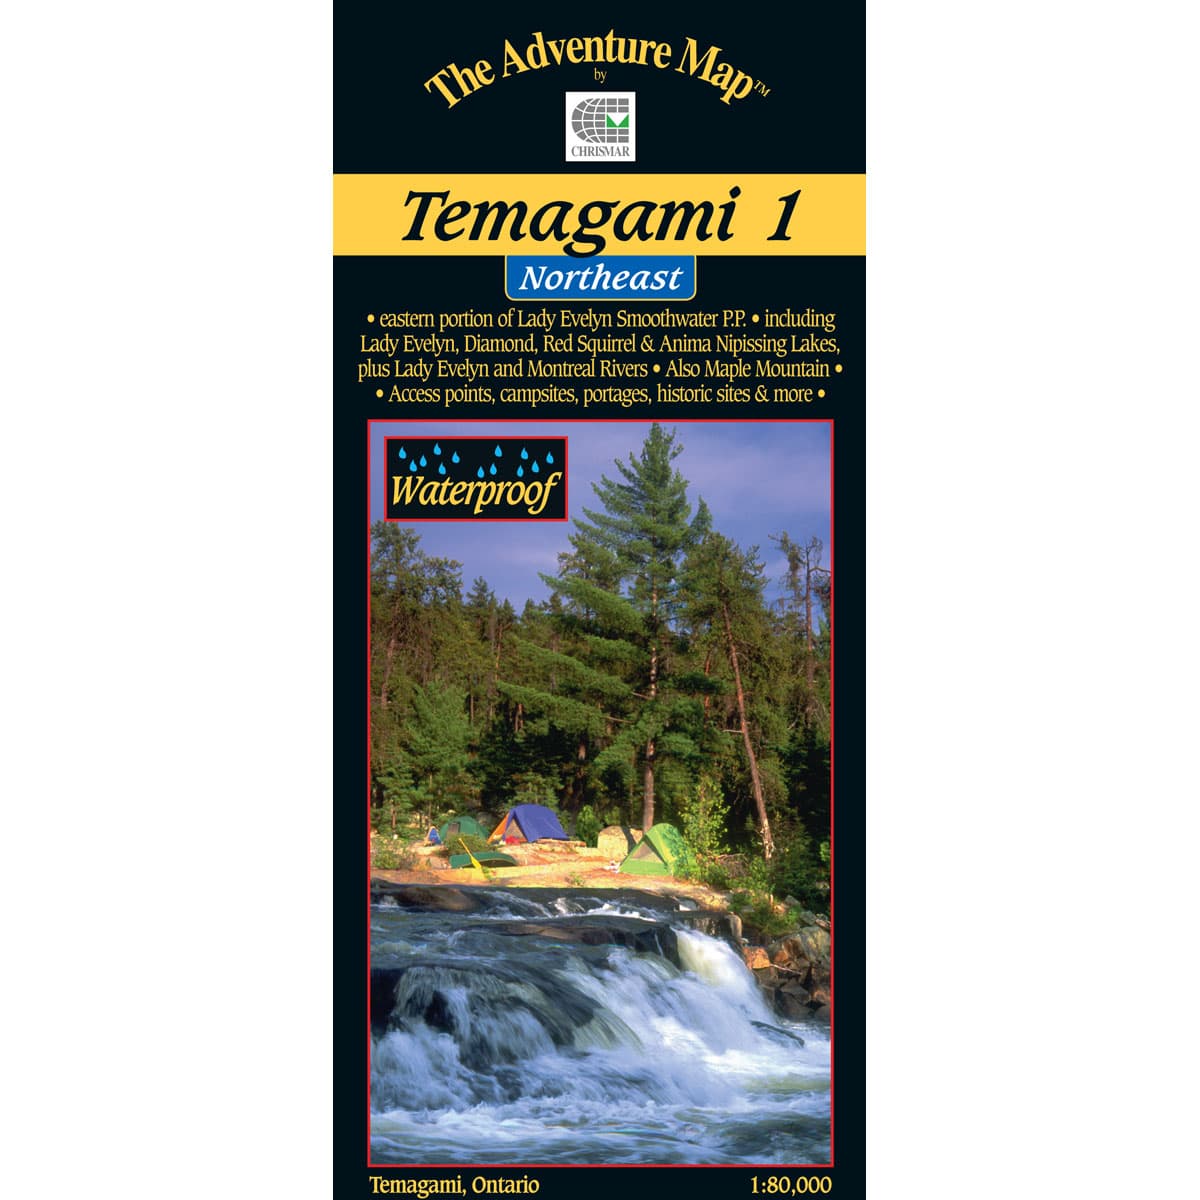 The Adventure Map Temagami 1 Northeast